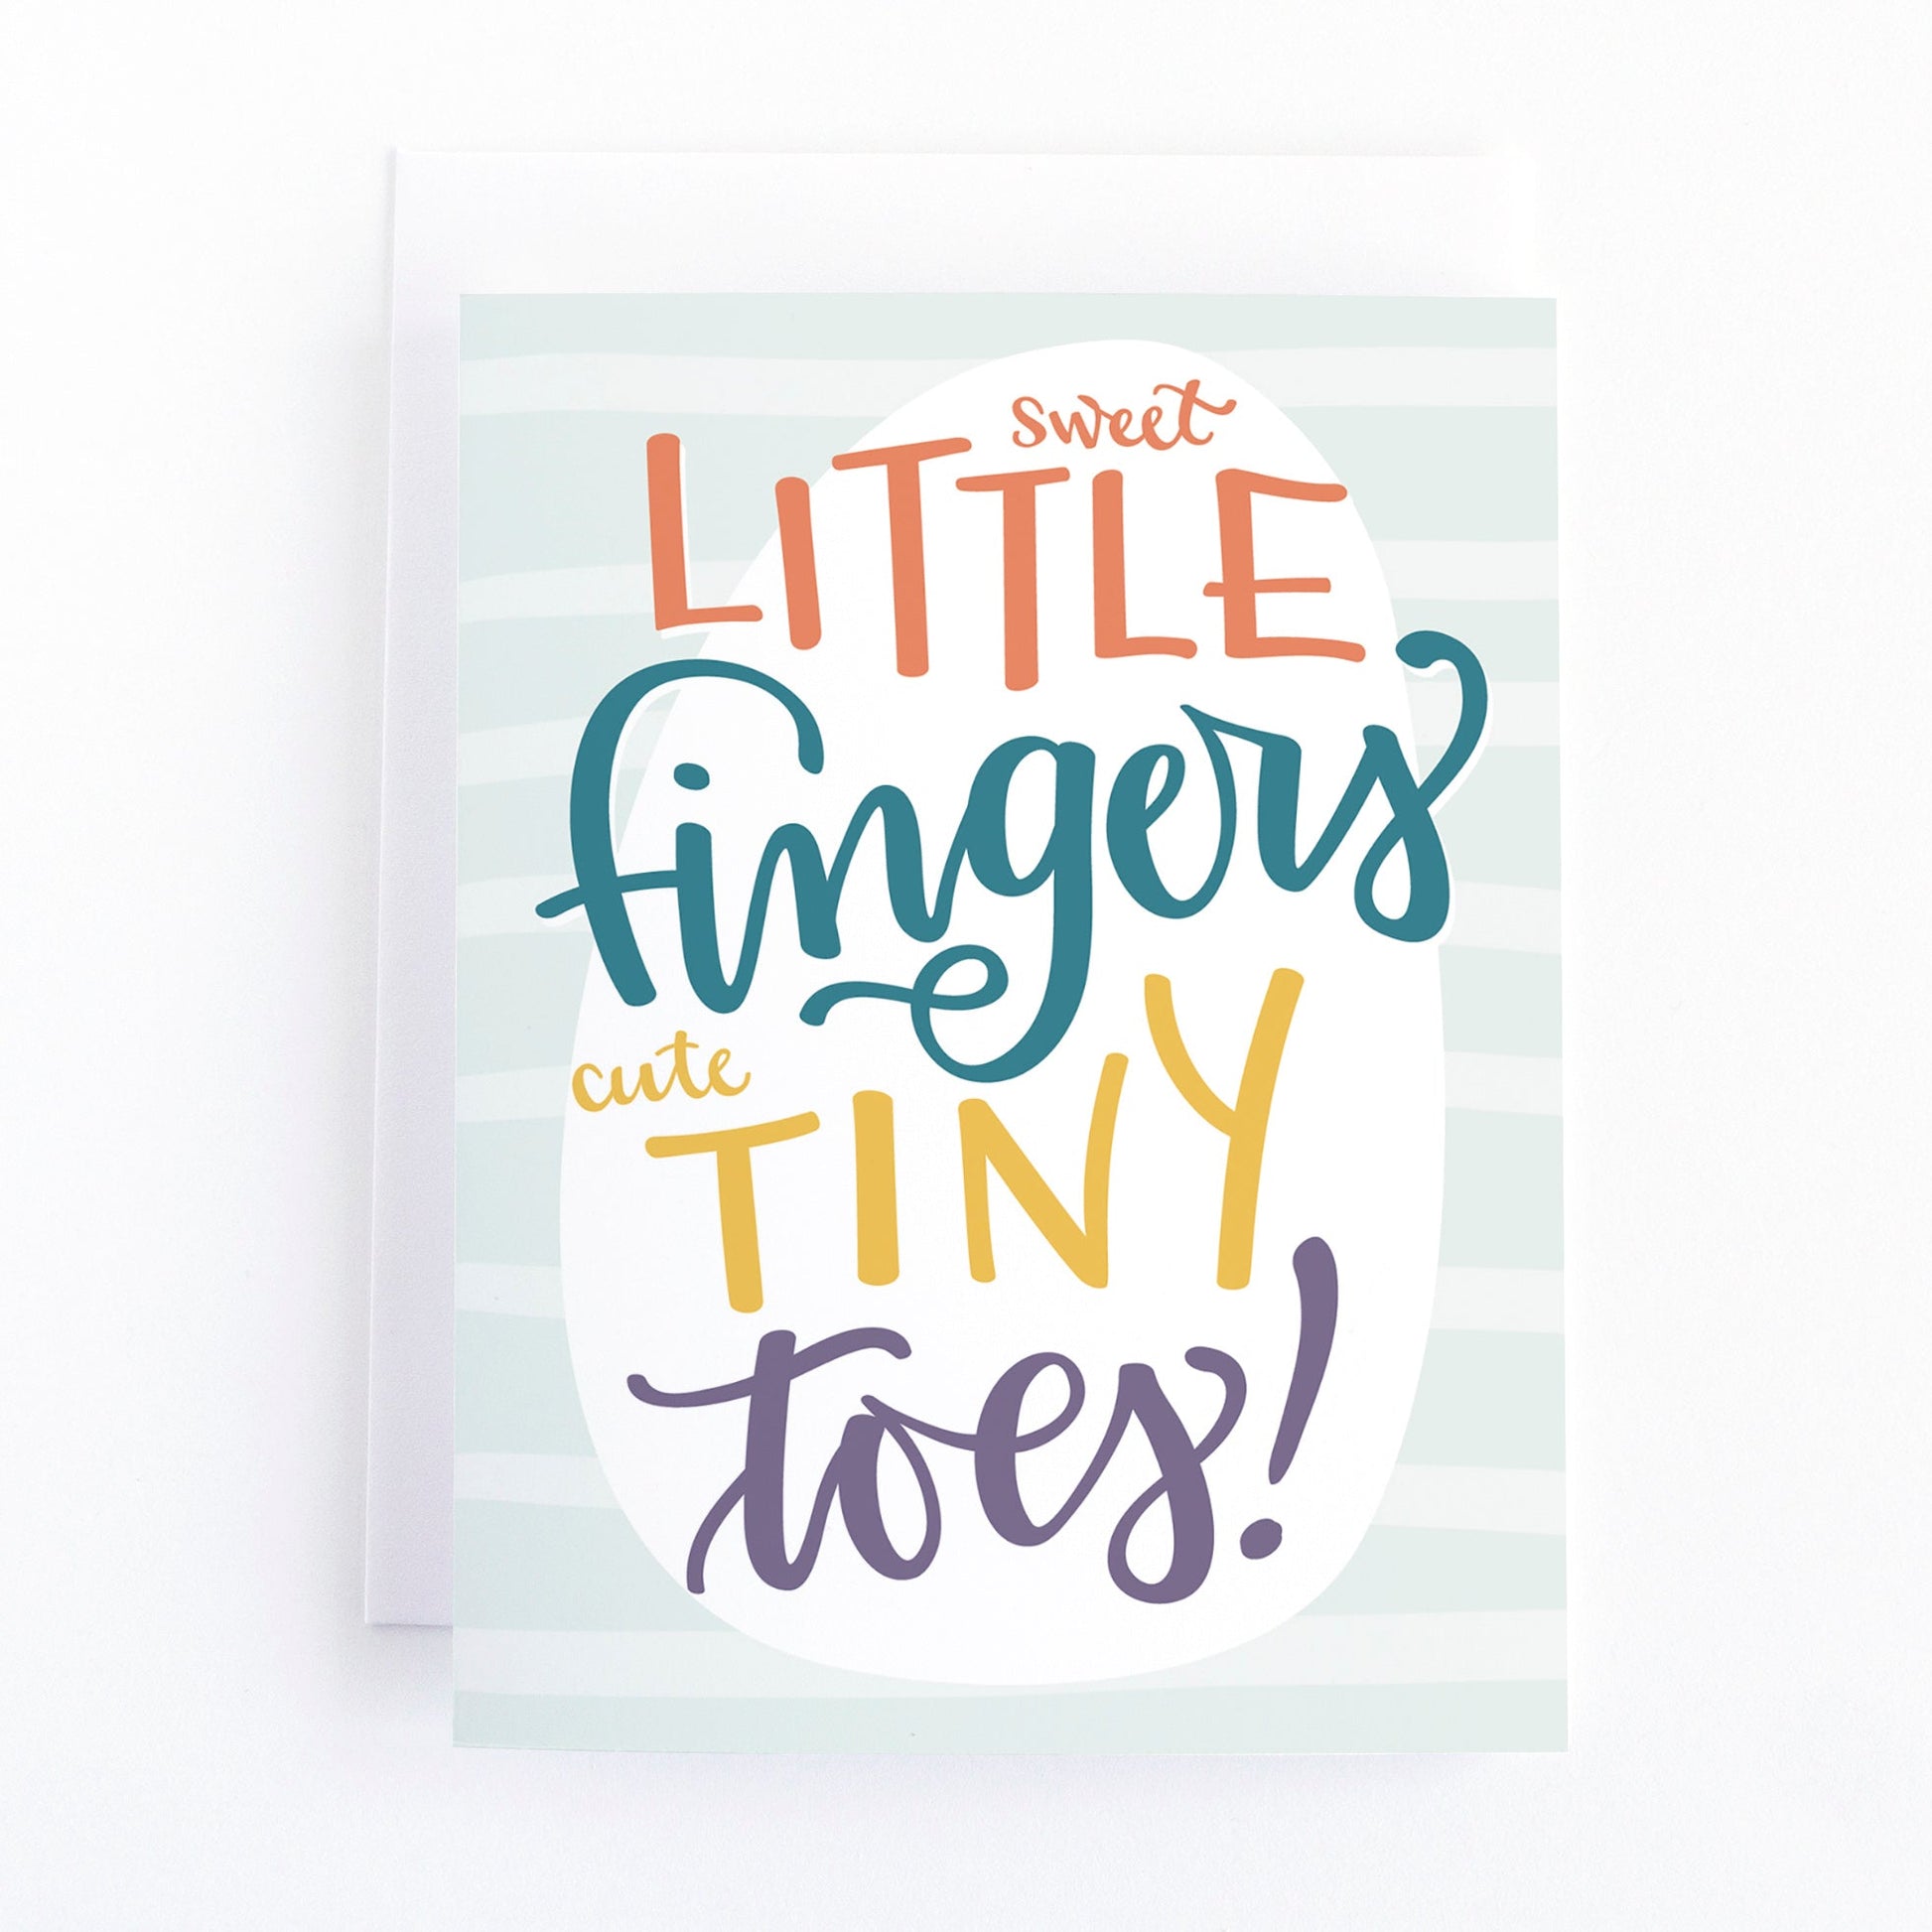 new baby card featuring a hand lettered message "sweet little fingers cute tiny toes" in multi-coloured lettering on a light blue striped background.